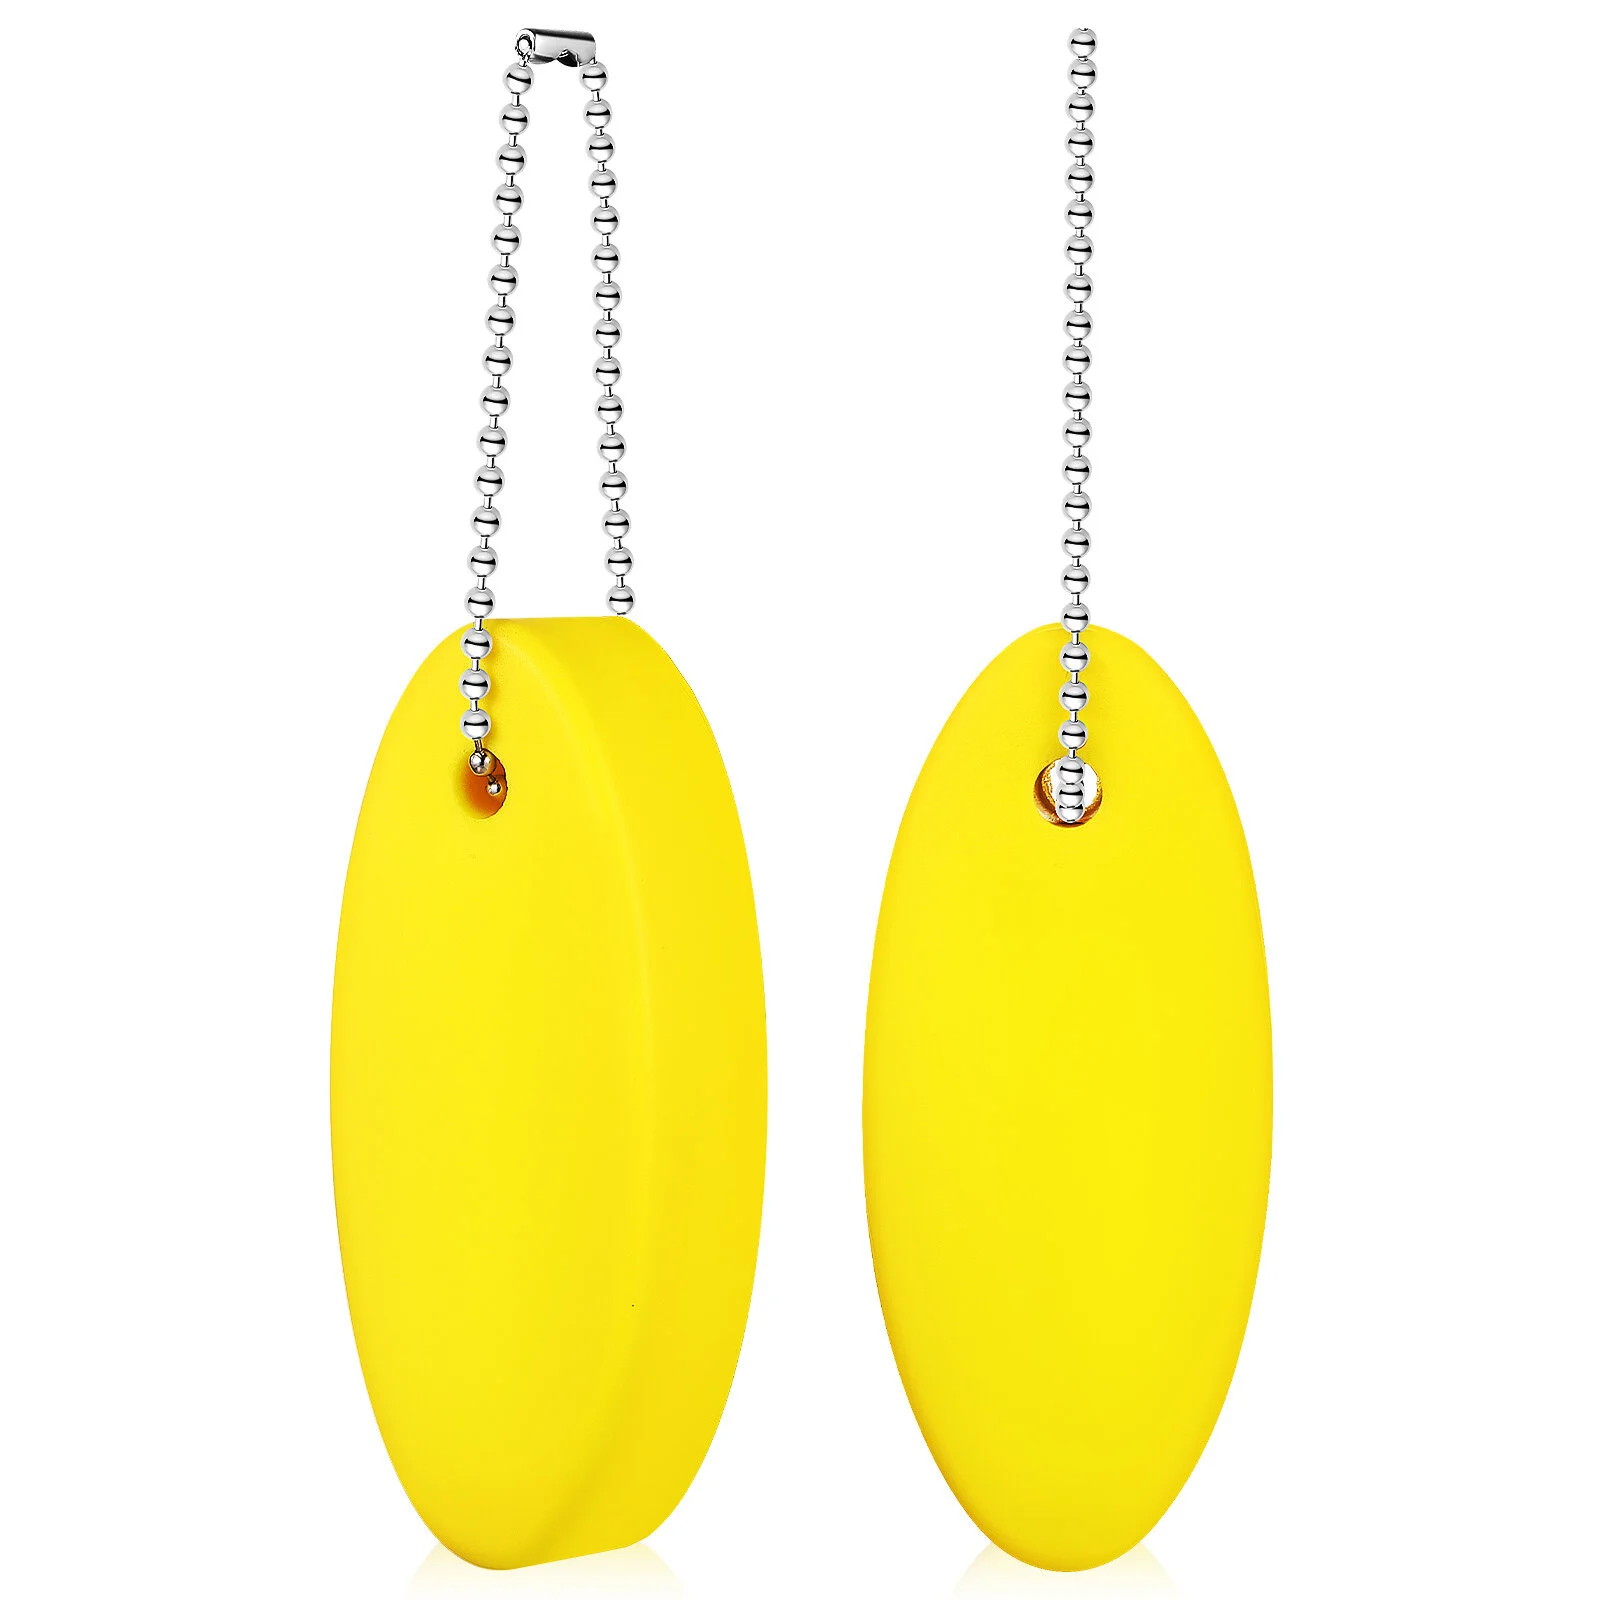 

2Pcs Floating Keychains Oval Shaped Float Key Ring Water Sports Accessories for Boating Swimming Diving Fishing